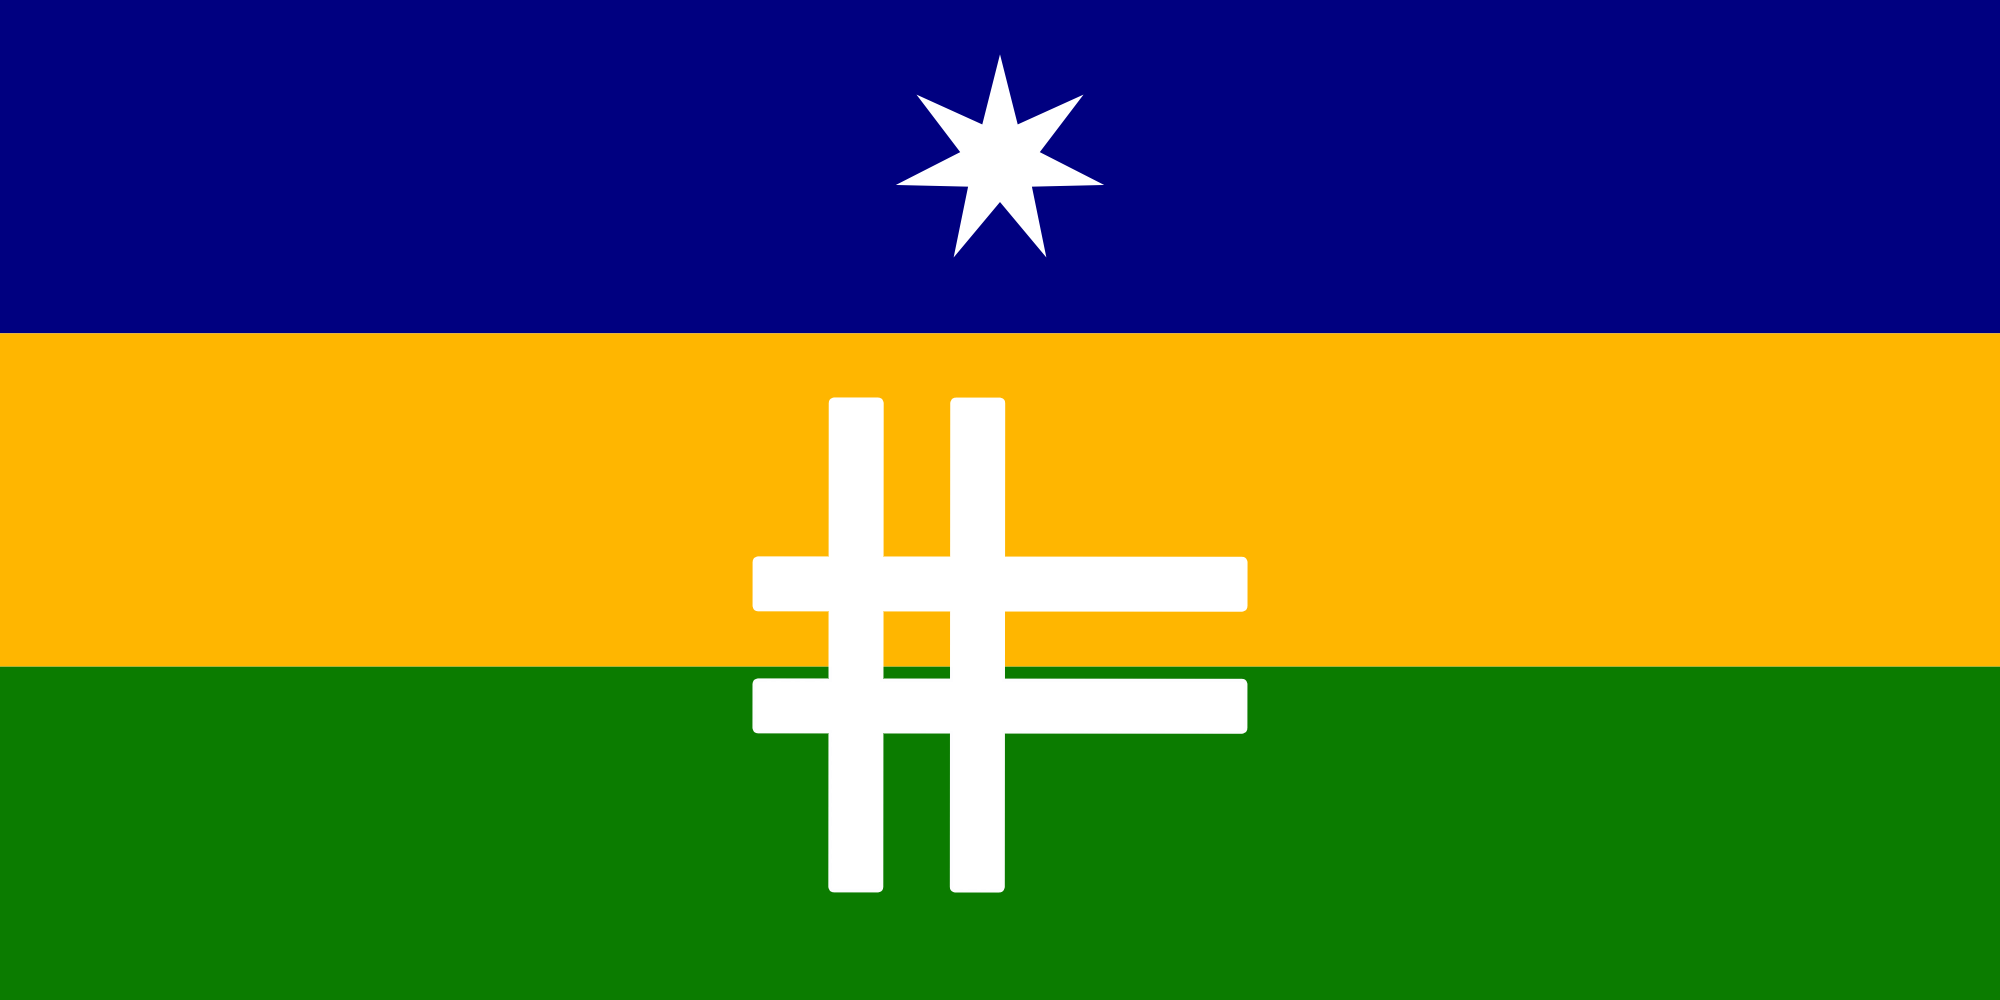 The redesigned Adelaide flag